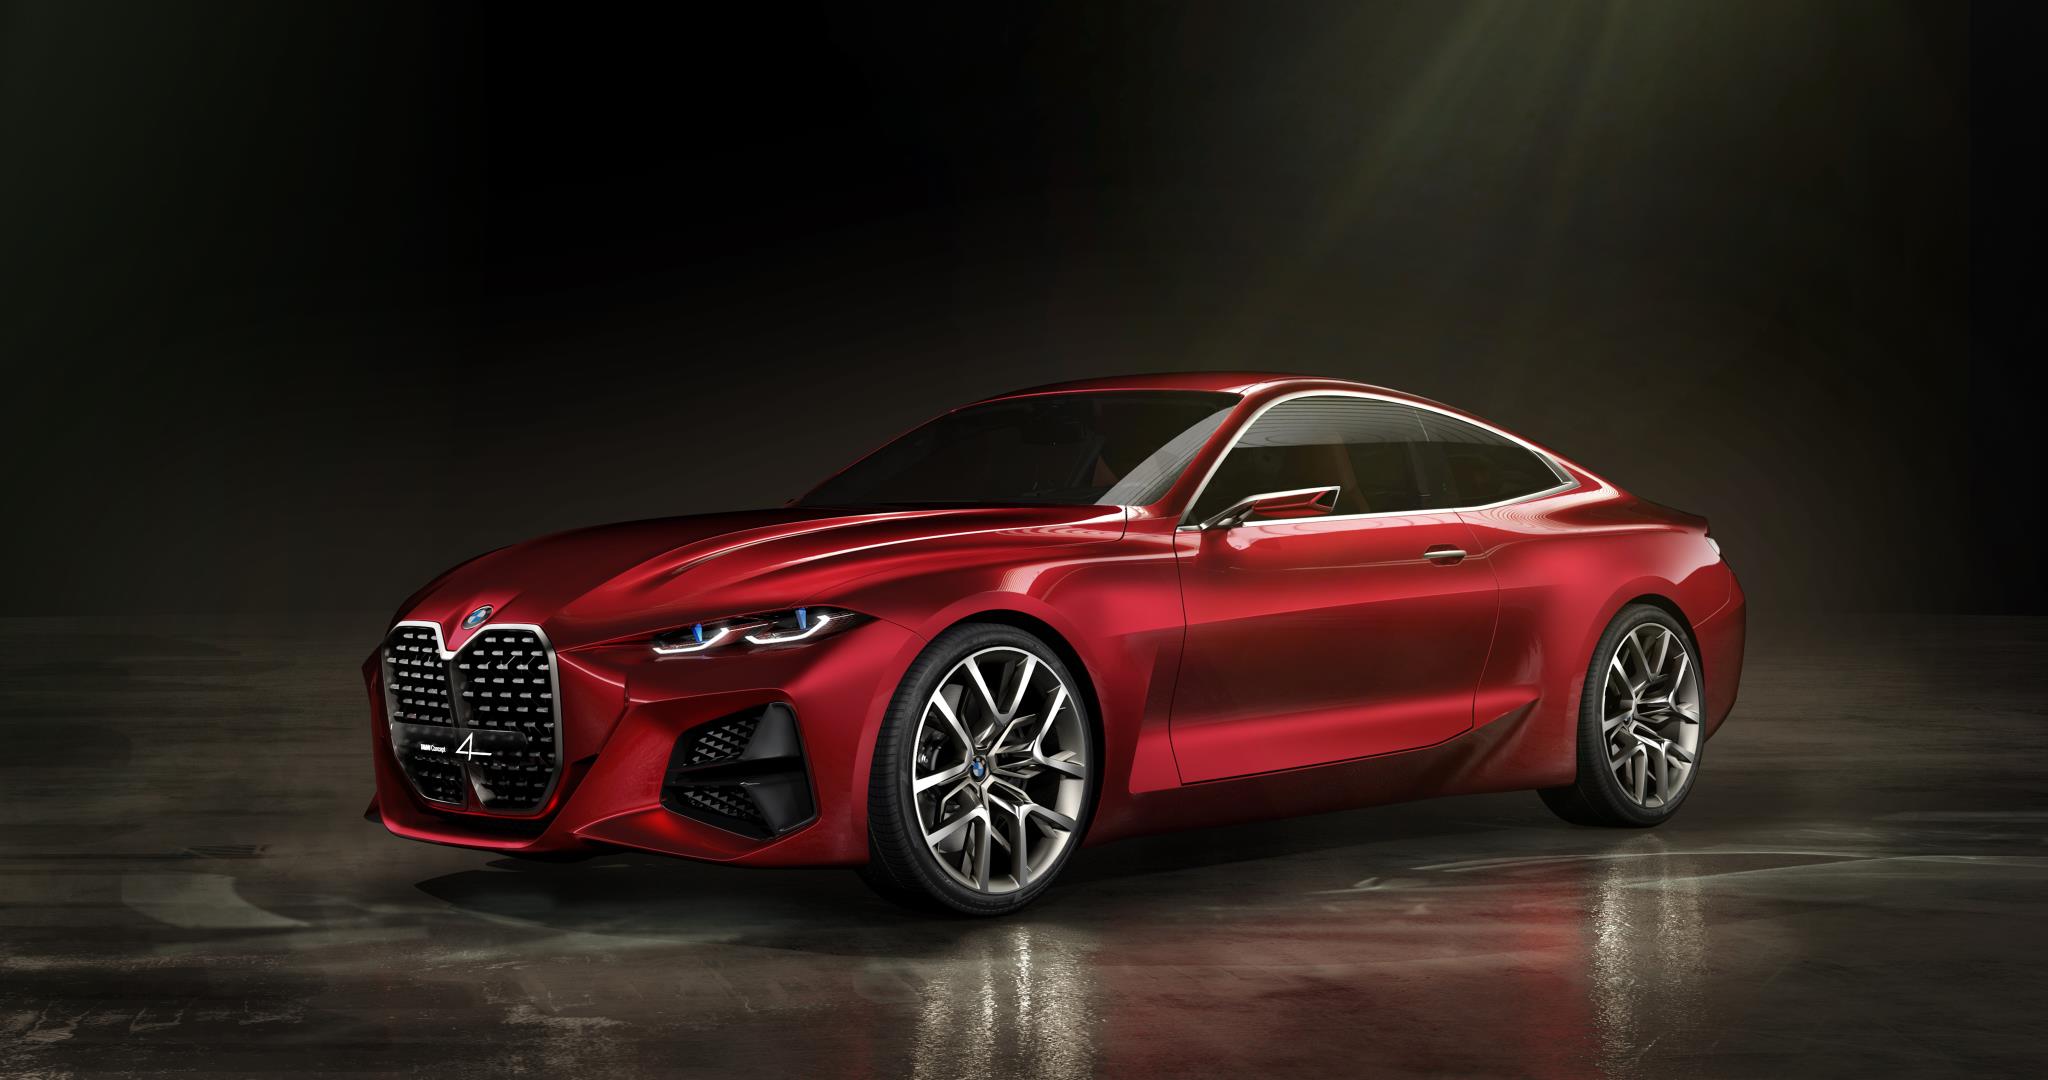 The Concept 4 gives a glimpse of what the upcoming 4 Series could look like